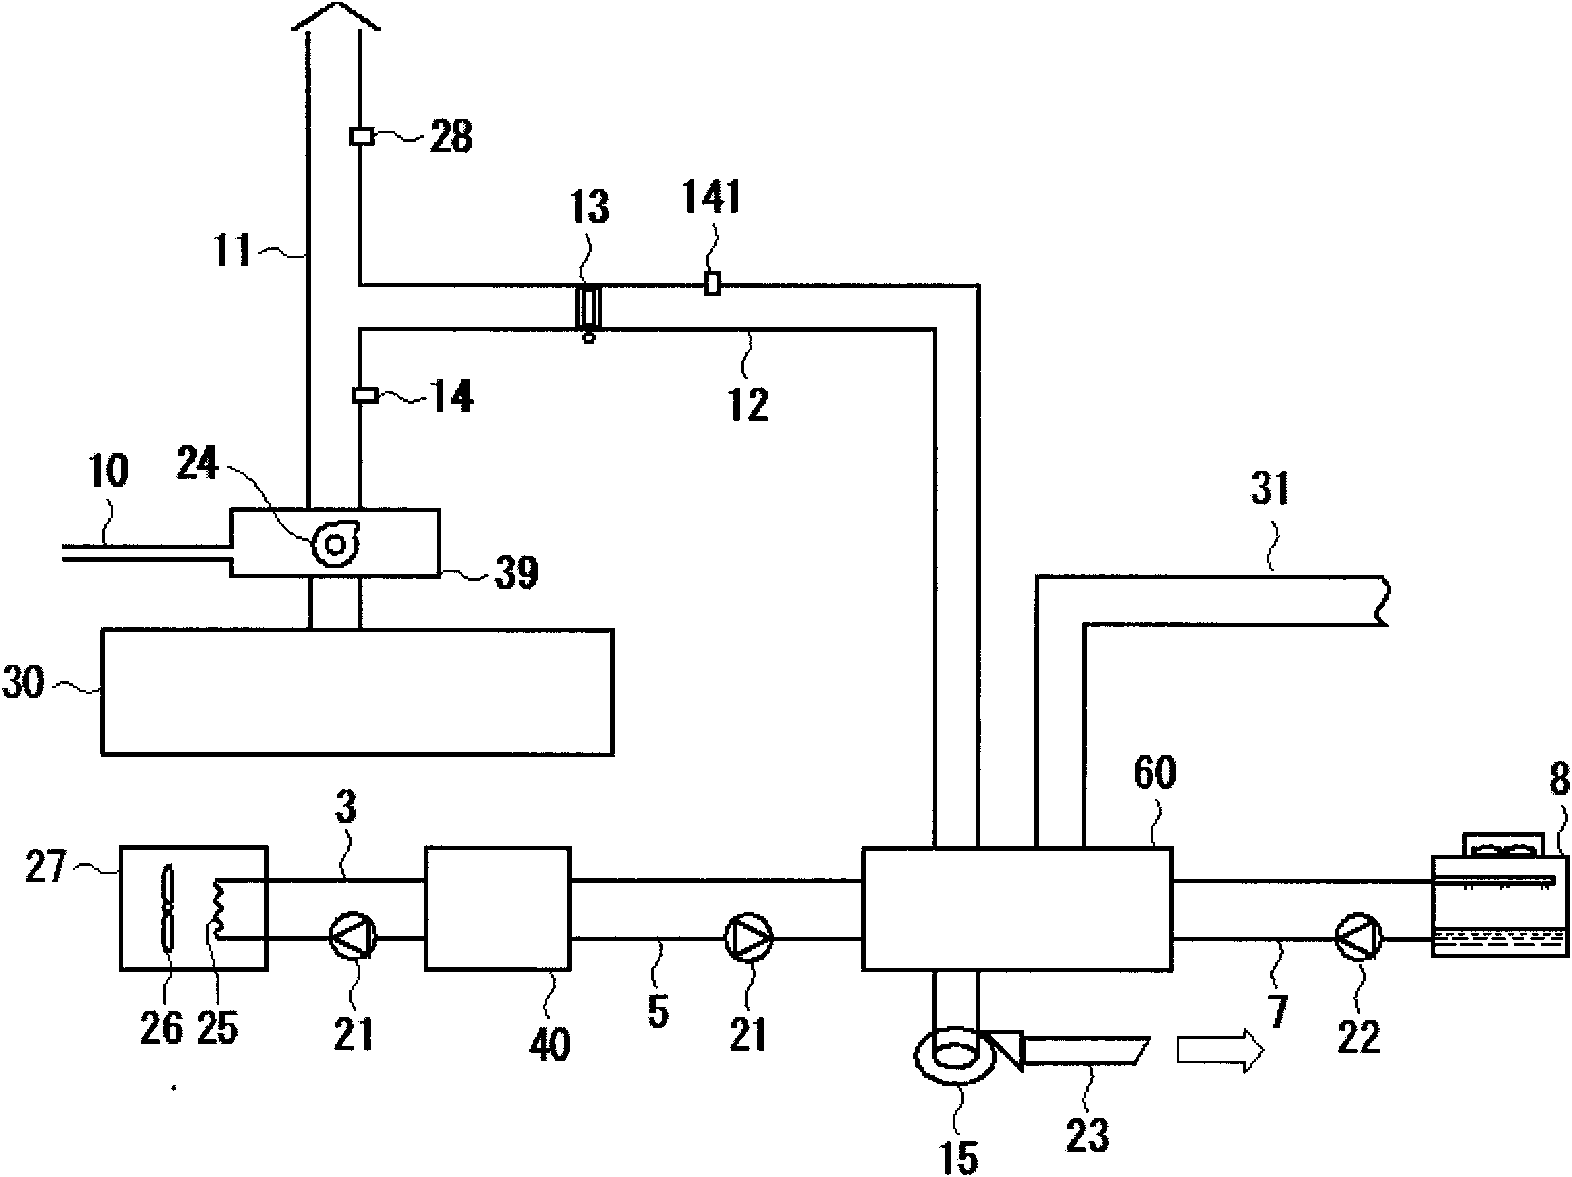 Waste heat recovery system